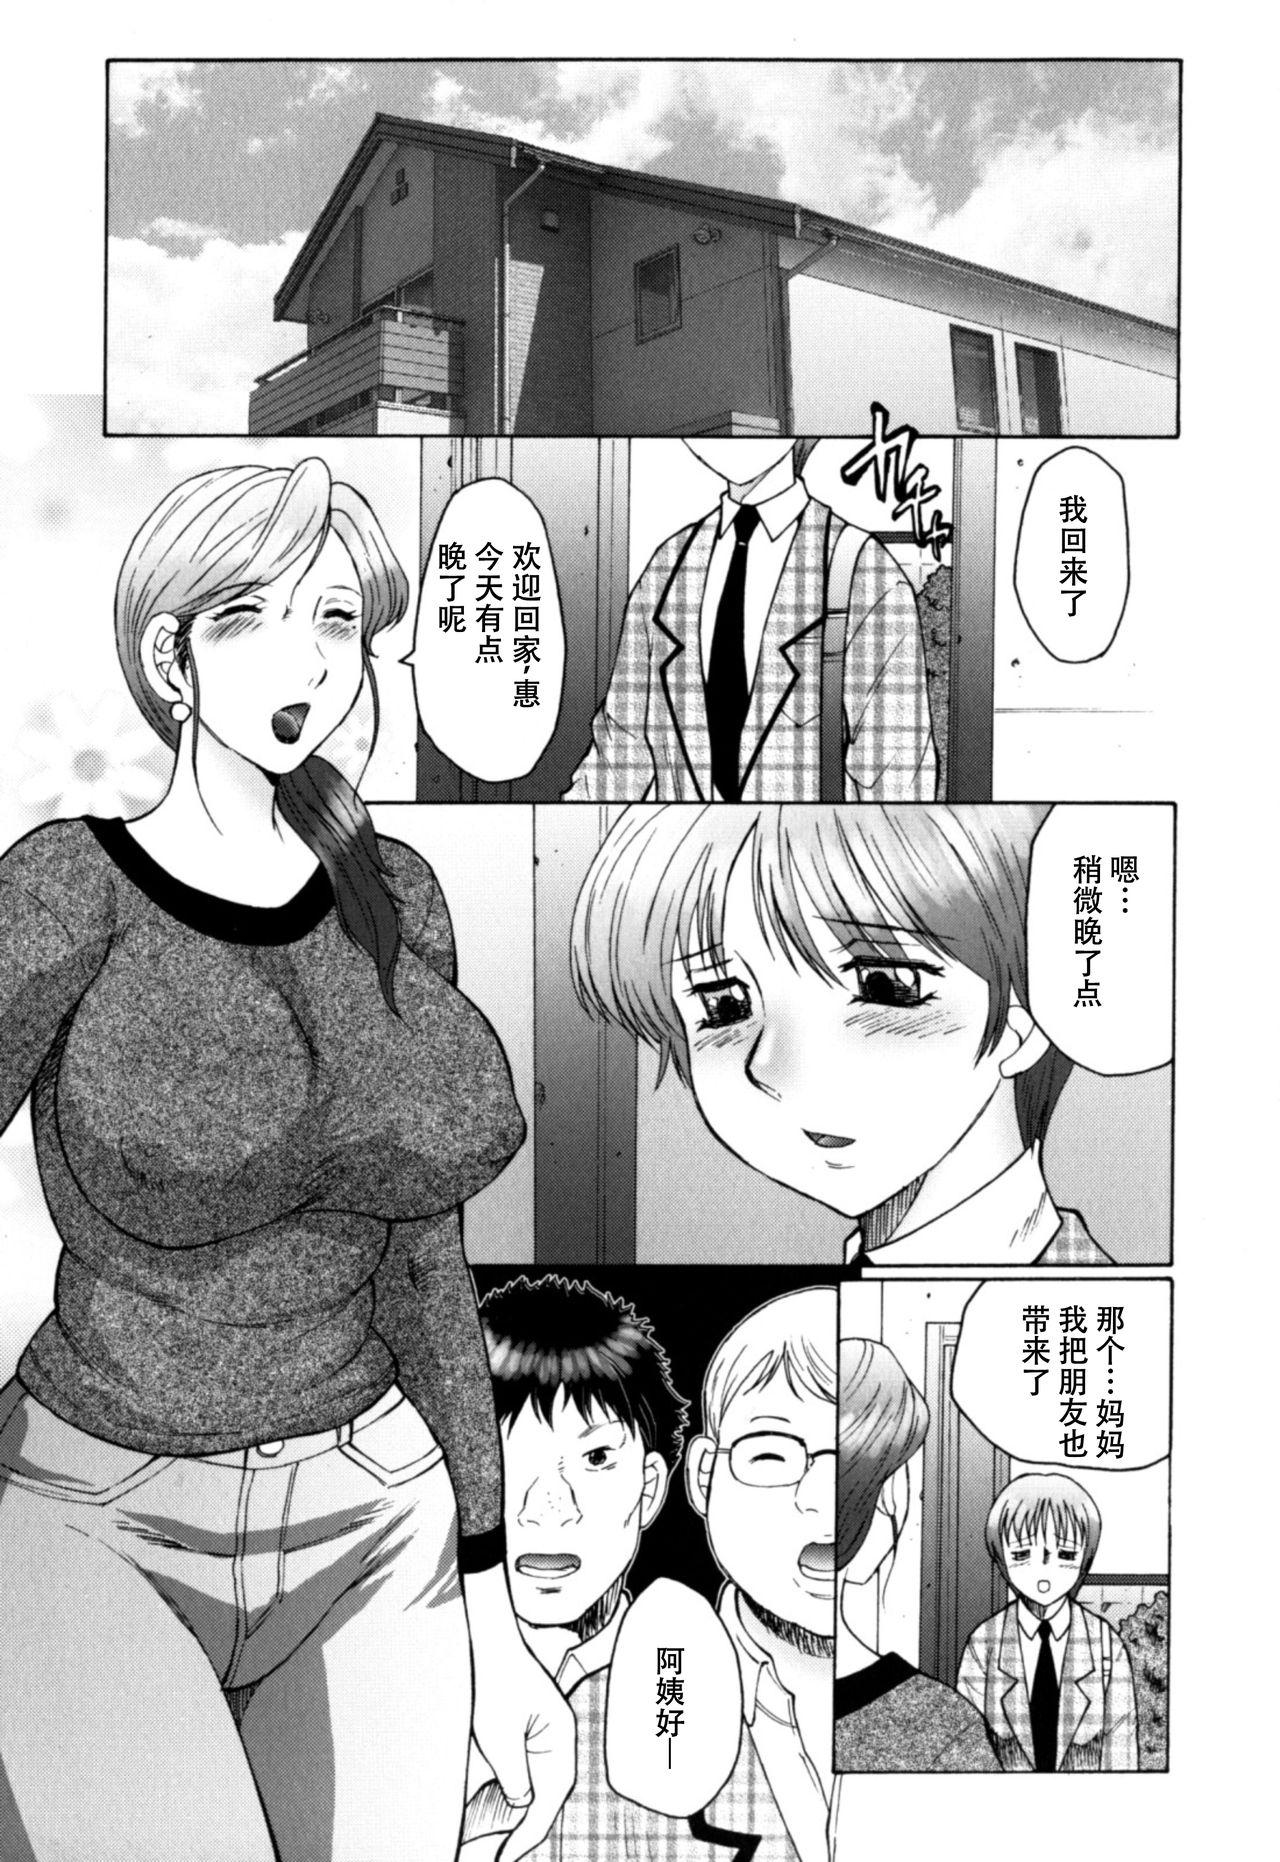 Brazzers [Fuusen Club] Haha Mamire Ch. 1 [Chinese]【不可视汉化】 Plumper - Page 4